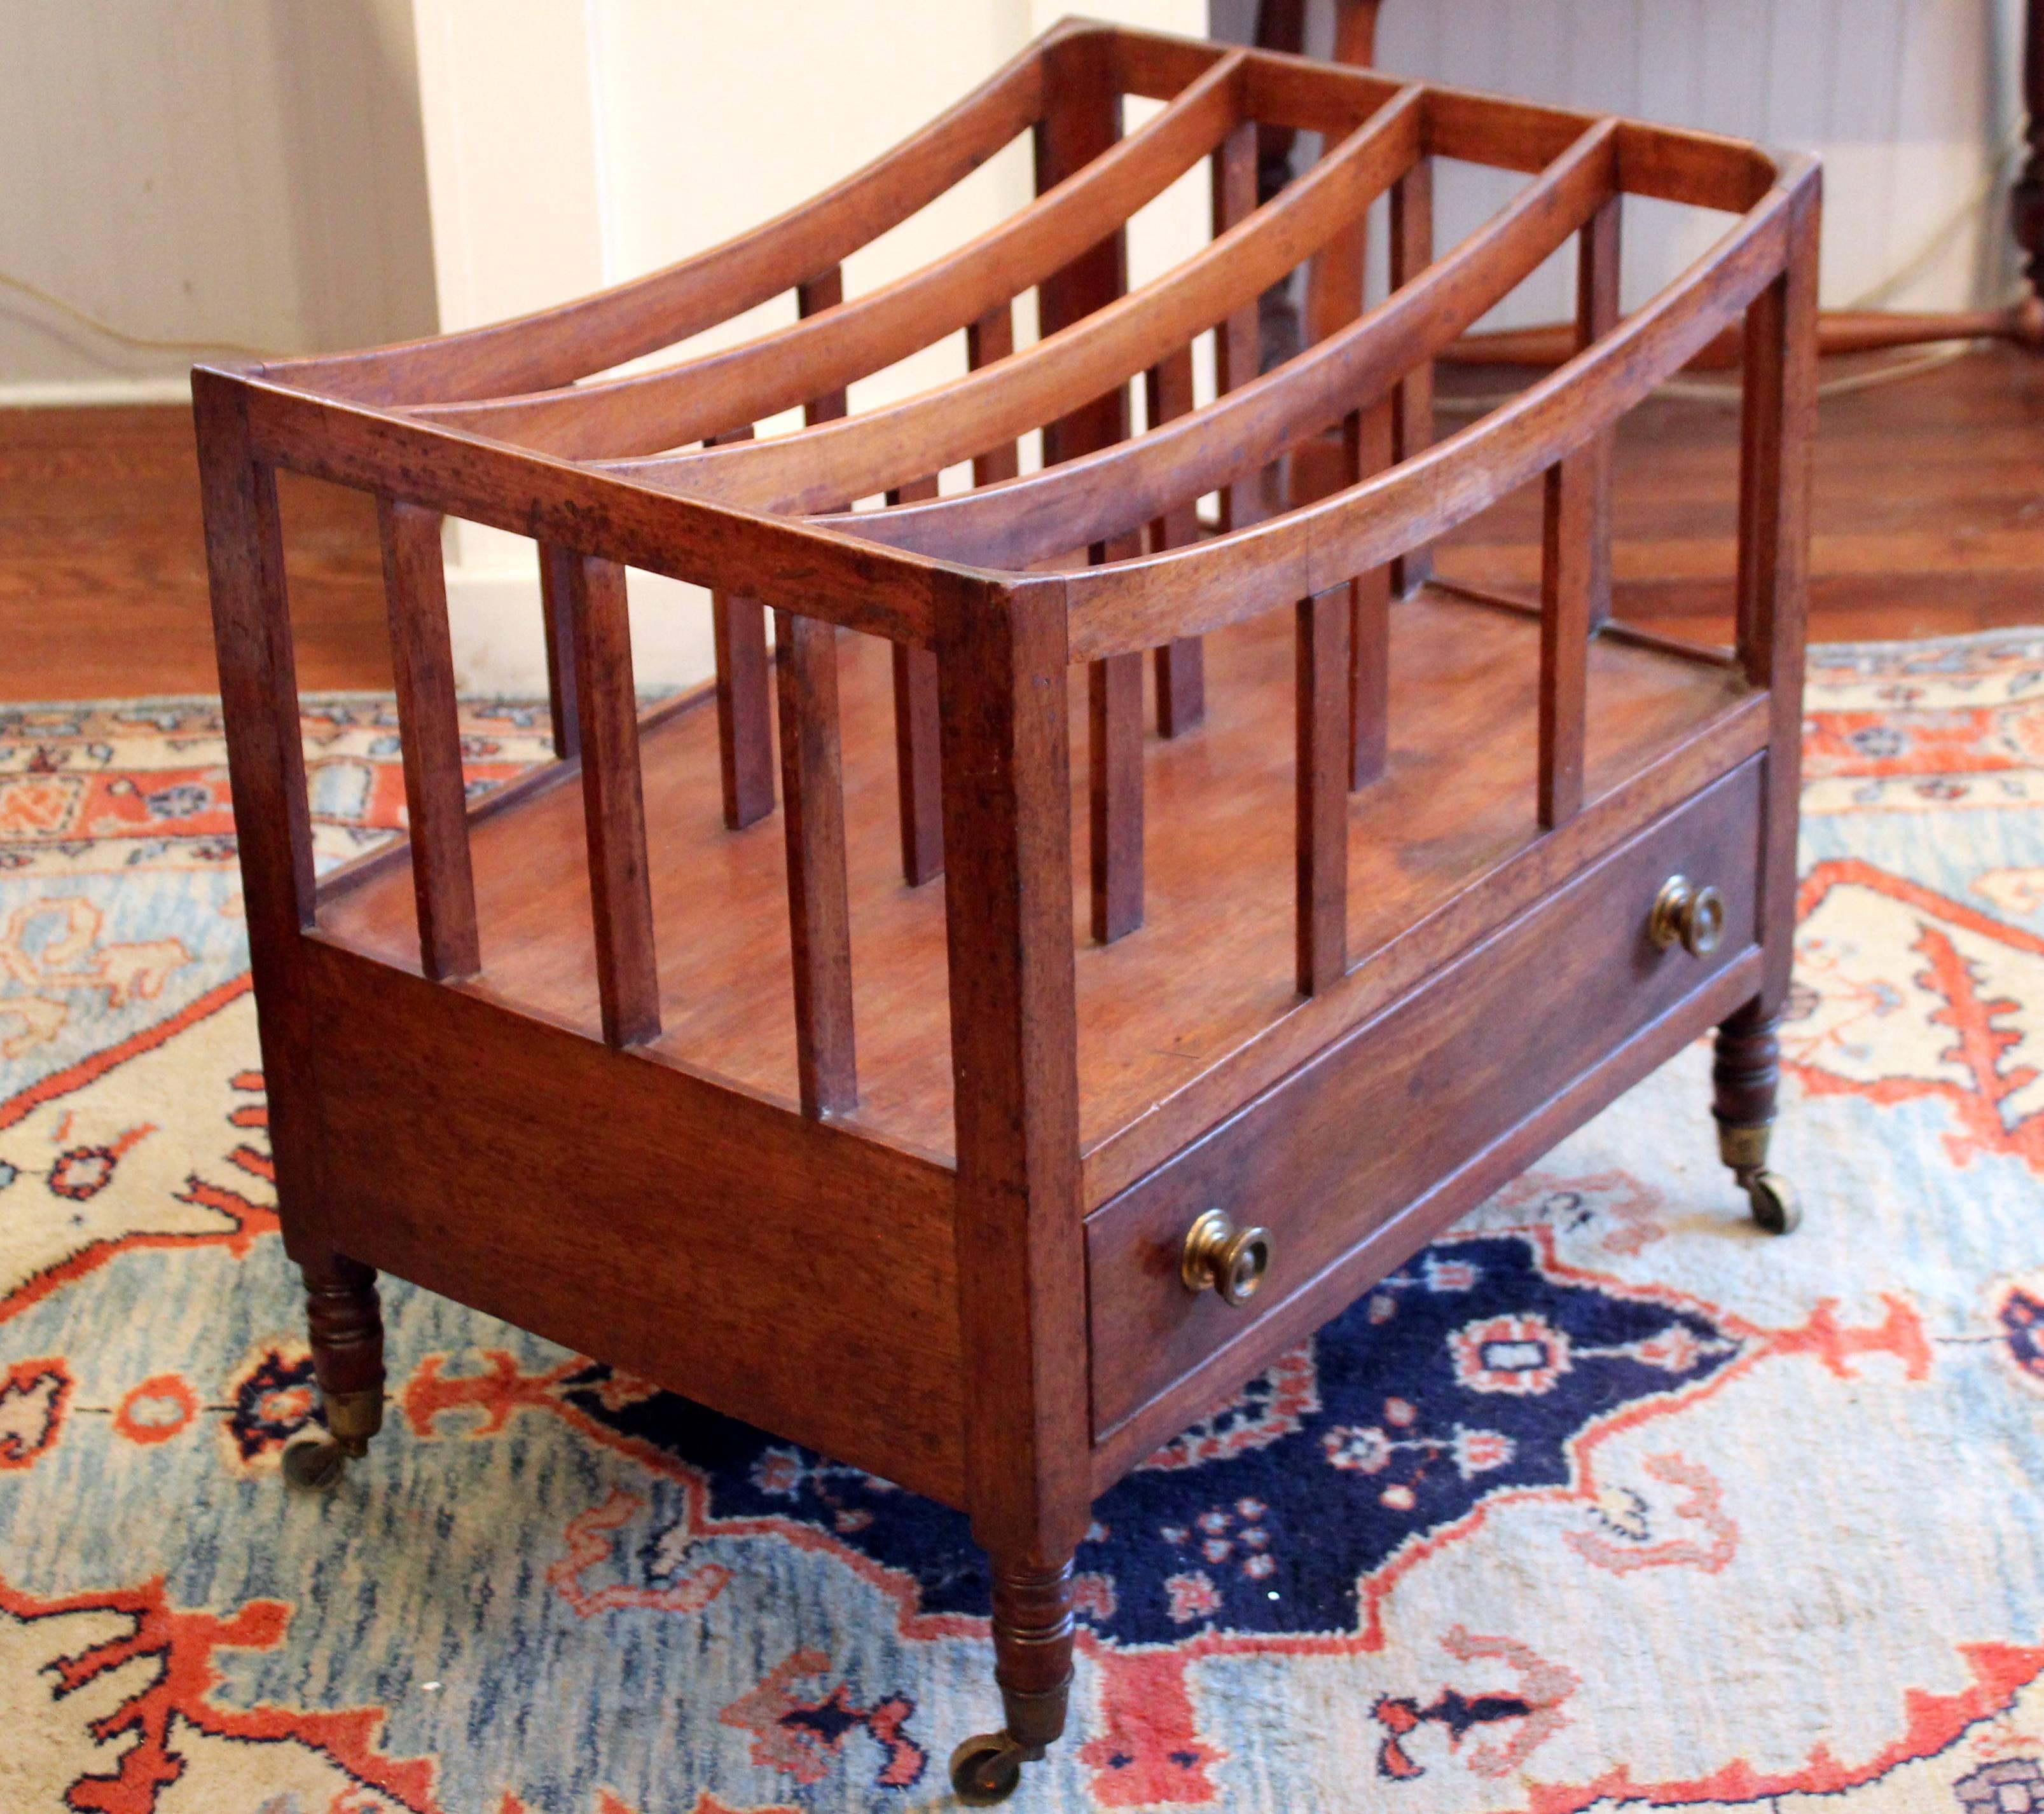 Antique English Regency mahogany canterbury with four slatted divisions over a single beaded drawer and raised on slender turned legs and brass castors, circa 1820. Several undercarriage supports and a drawer runner replaced, as shown.